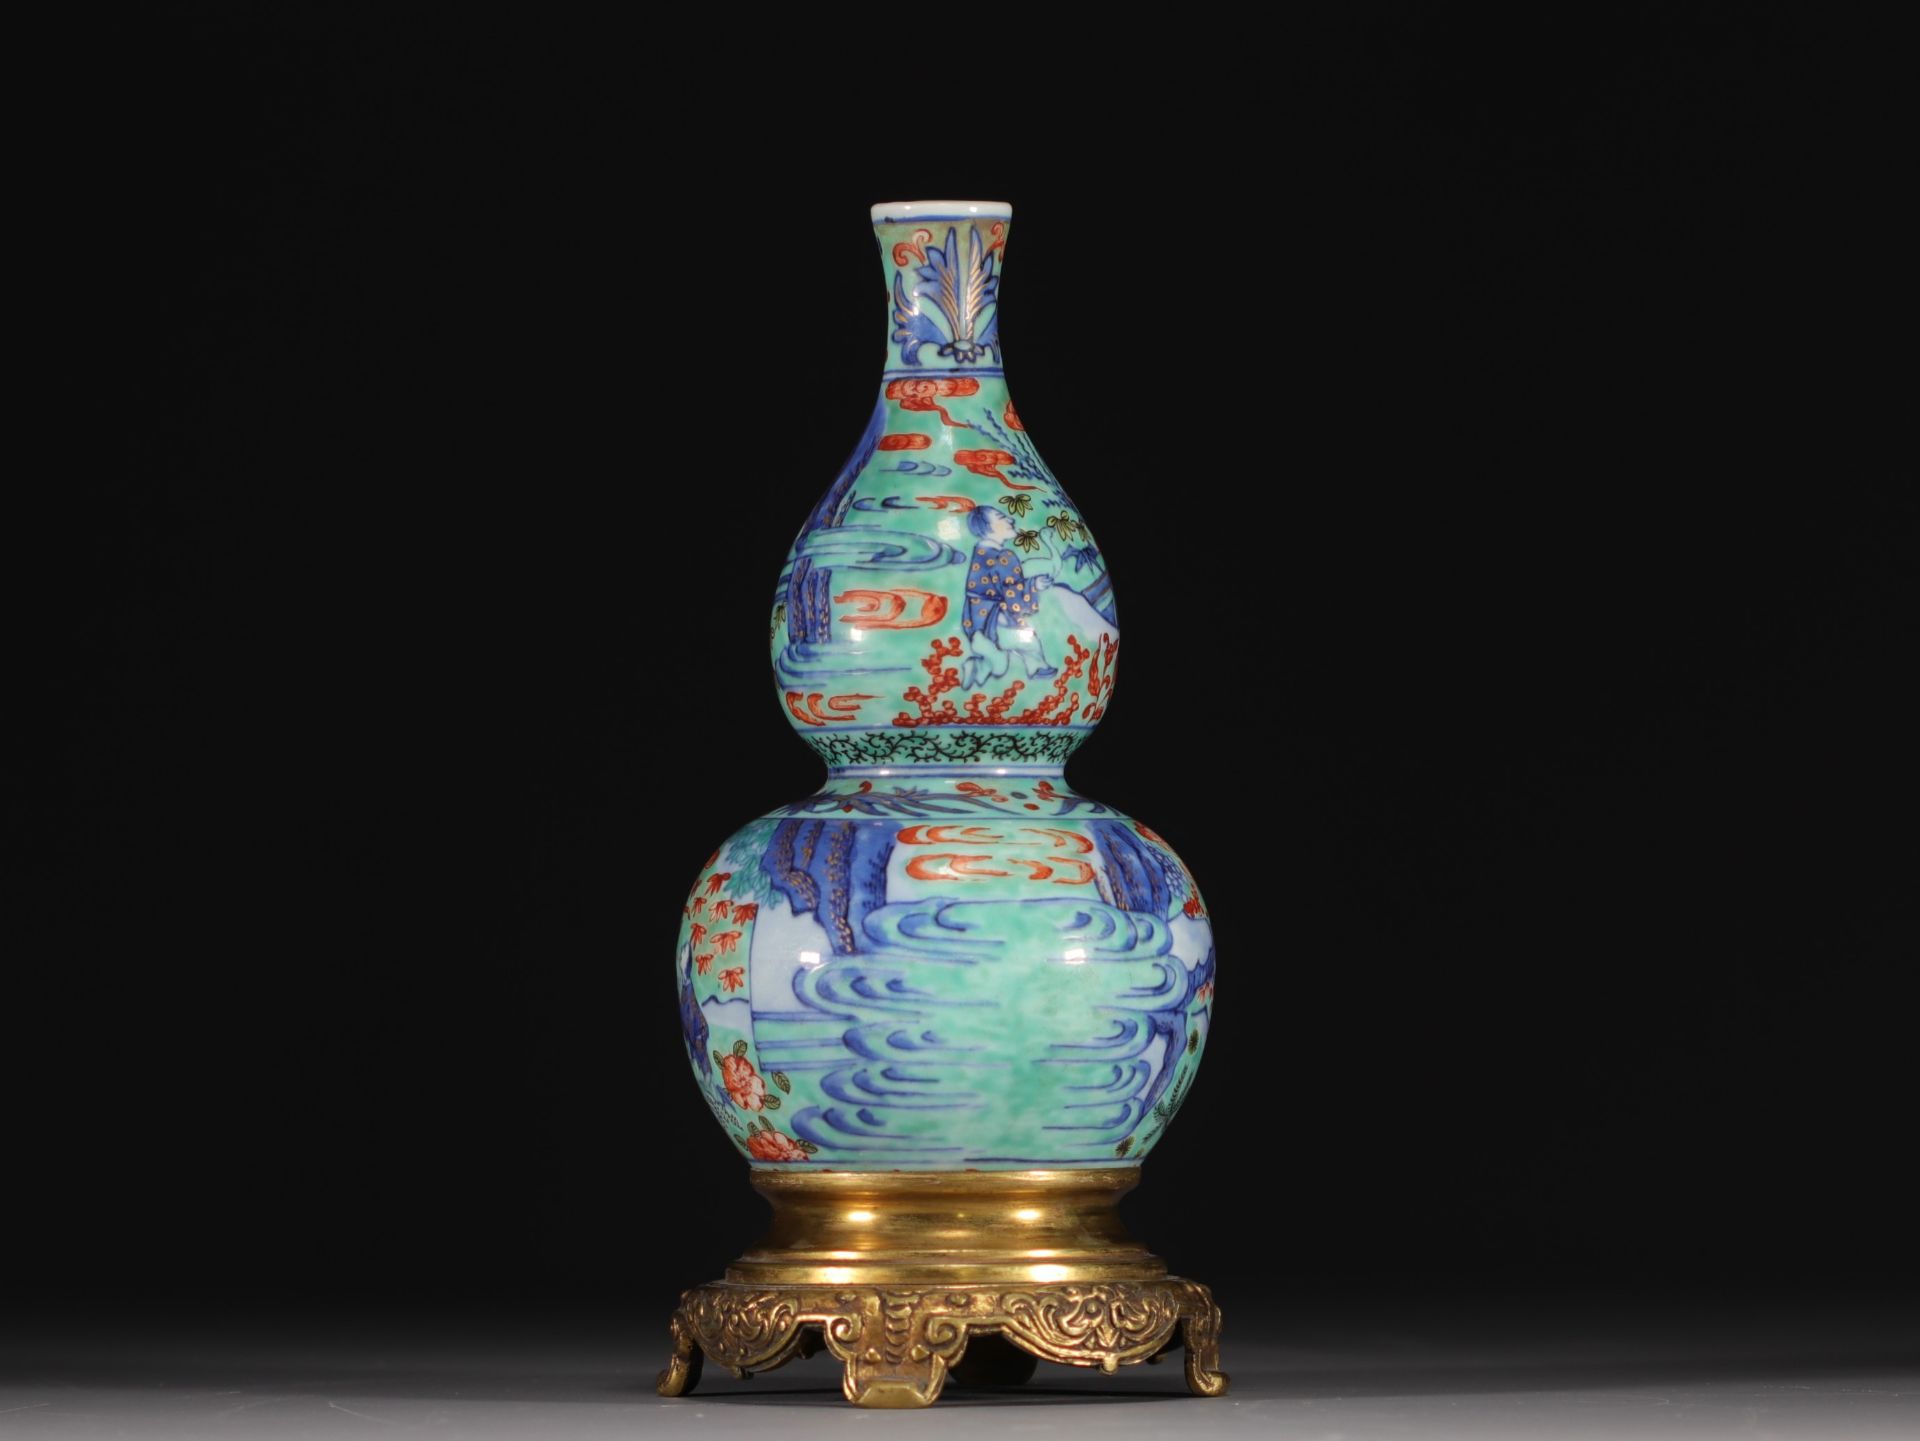 China - Porcelain double gourd vase with figures, gilt bronze mounting, Qing period. - Image 4 of 6